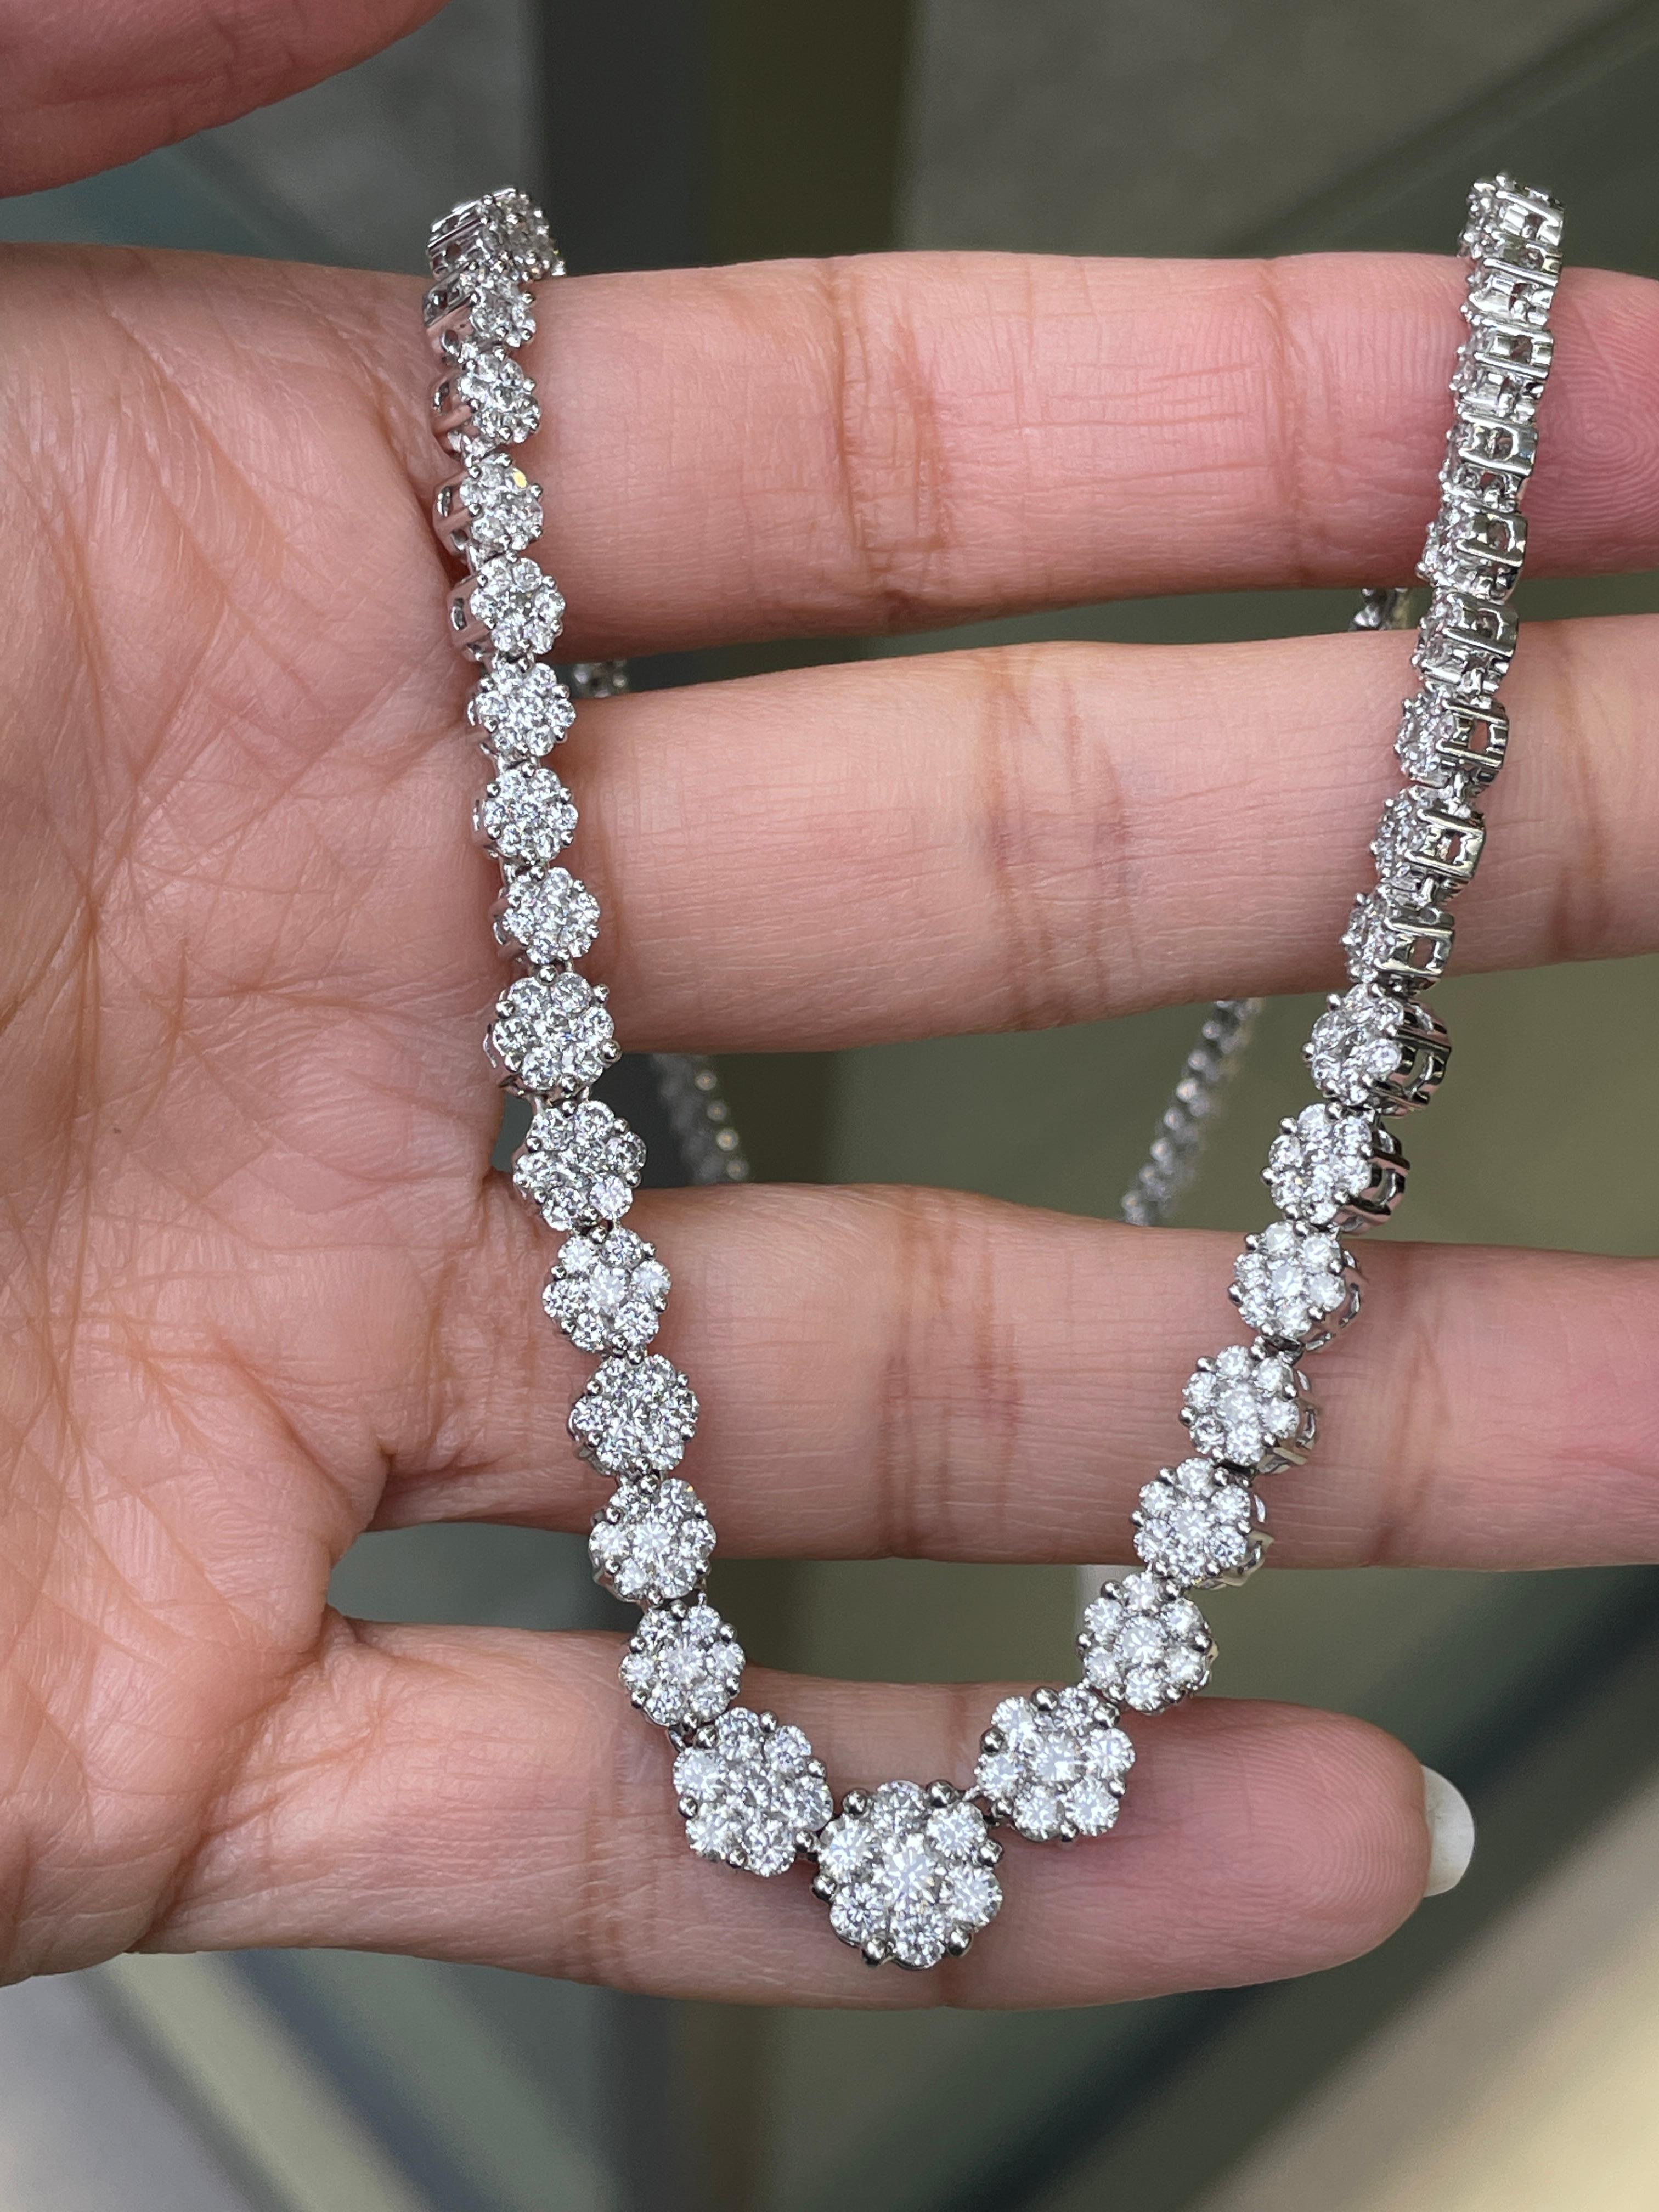 Experience the epitome of luxury with this captivating diamond necklace by famous jewellery designer, Effy Hematian.

A breathtaking articulated series of 35 delicate floral diamond clusters, with an impressive combined weight of approximately